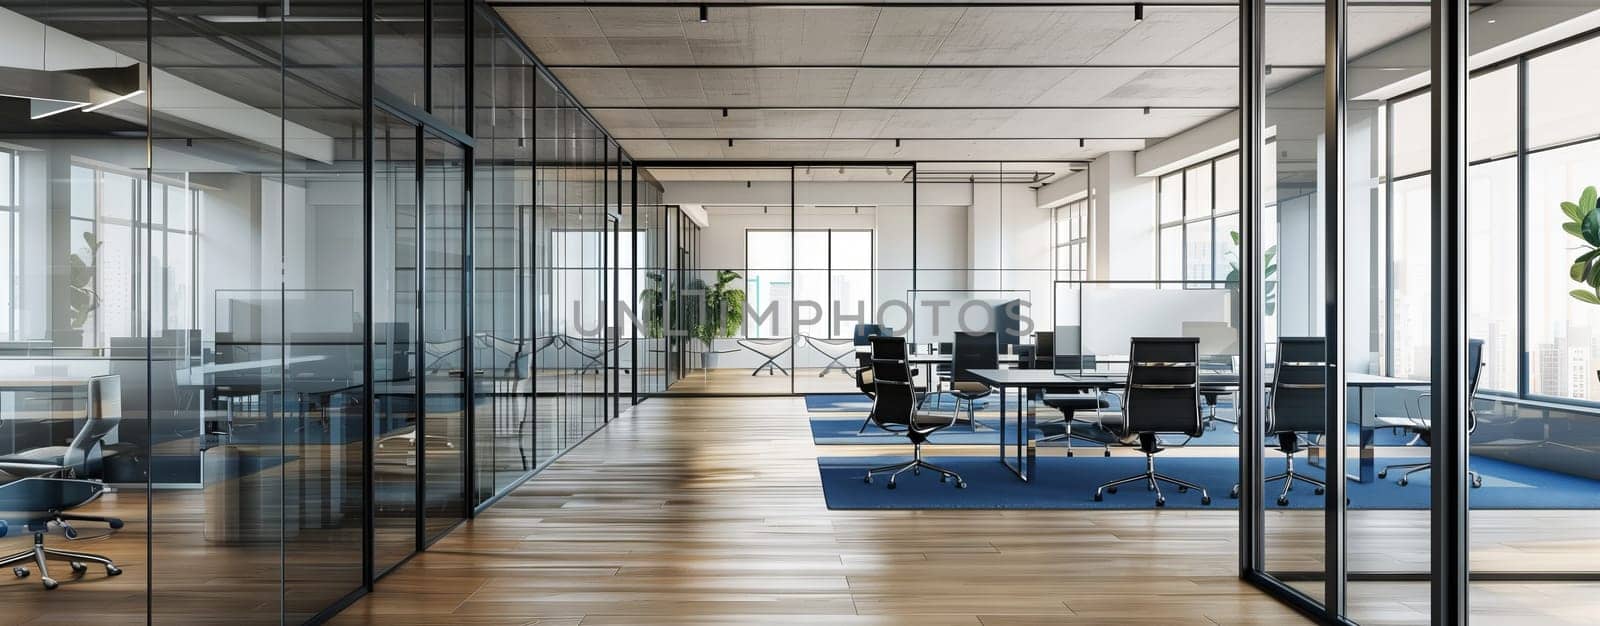 Glasswalled office with ample windows and hardwood flooring by richwolf